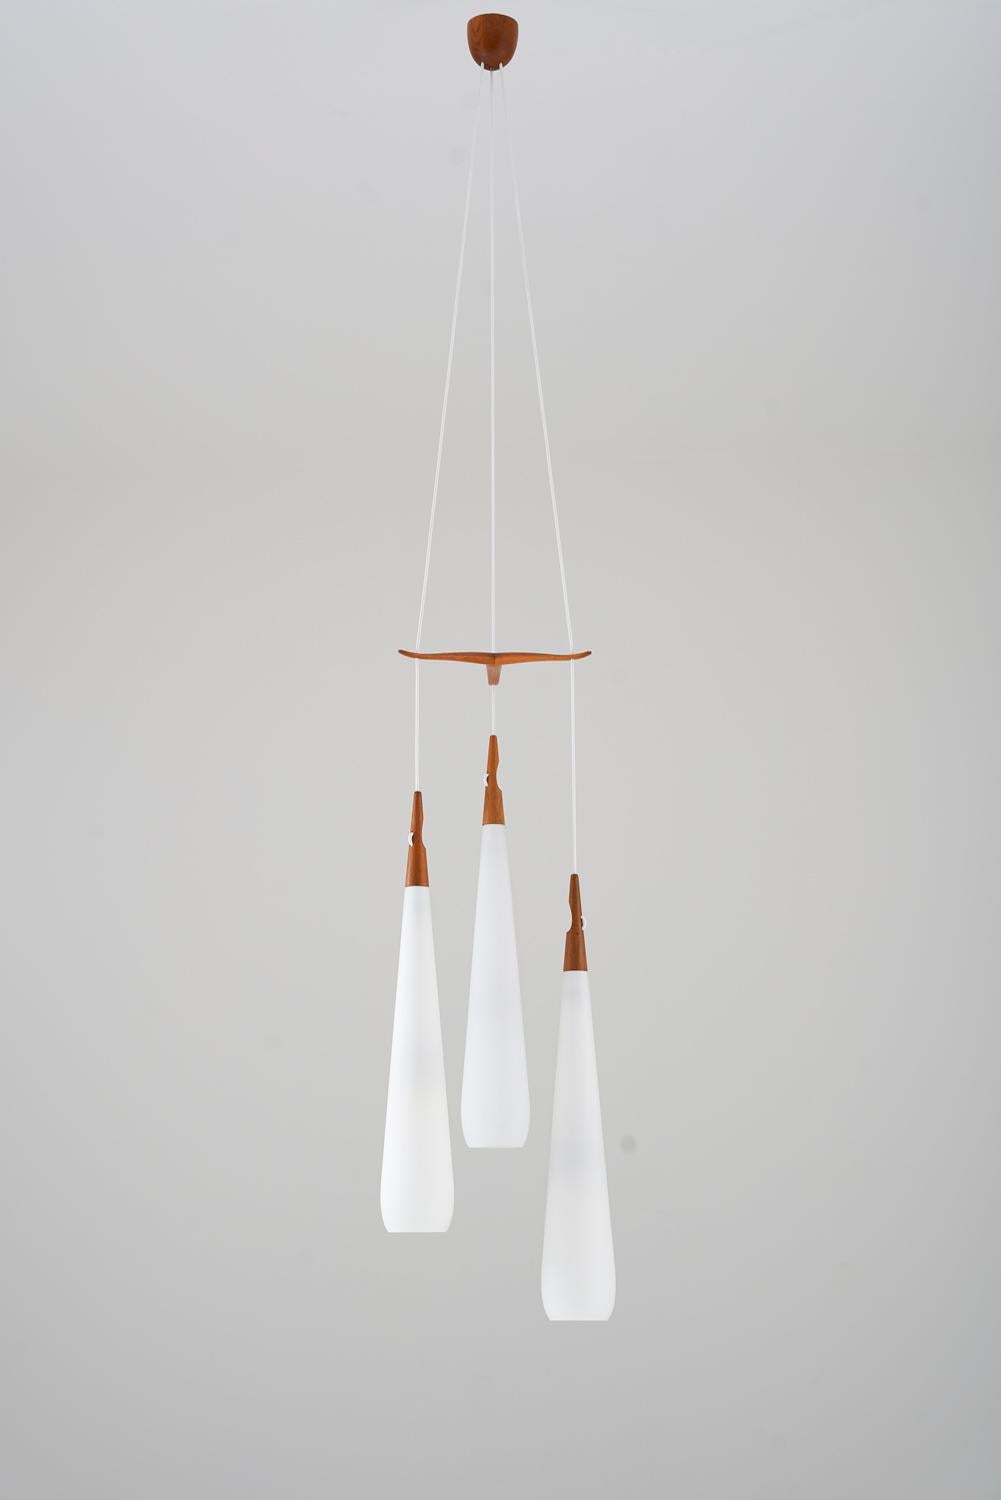 Chandelier by Uno & Östen Kristiansson for Luxus, Sweden.
The chandelier features three large opaline glass shades, separated by an elegant divider in teak, which can be moved to adjust the height of the shades. The frosted opaline glass gives a